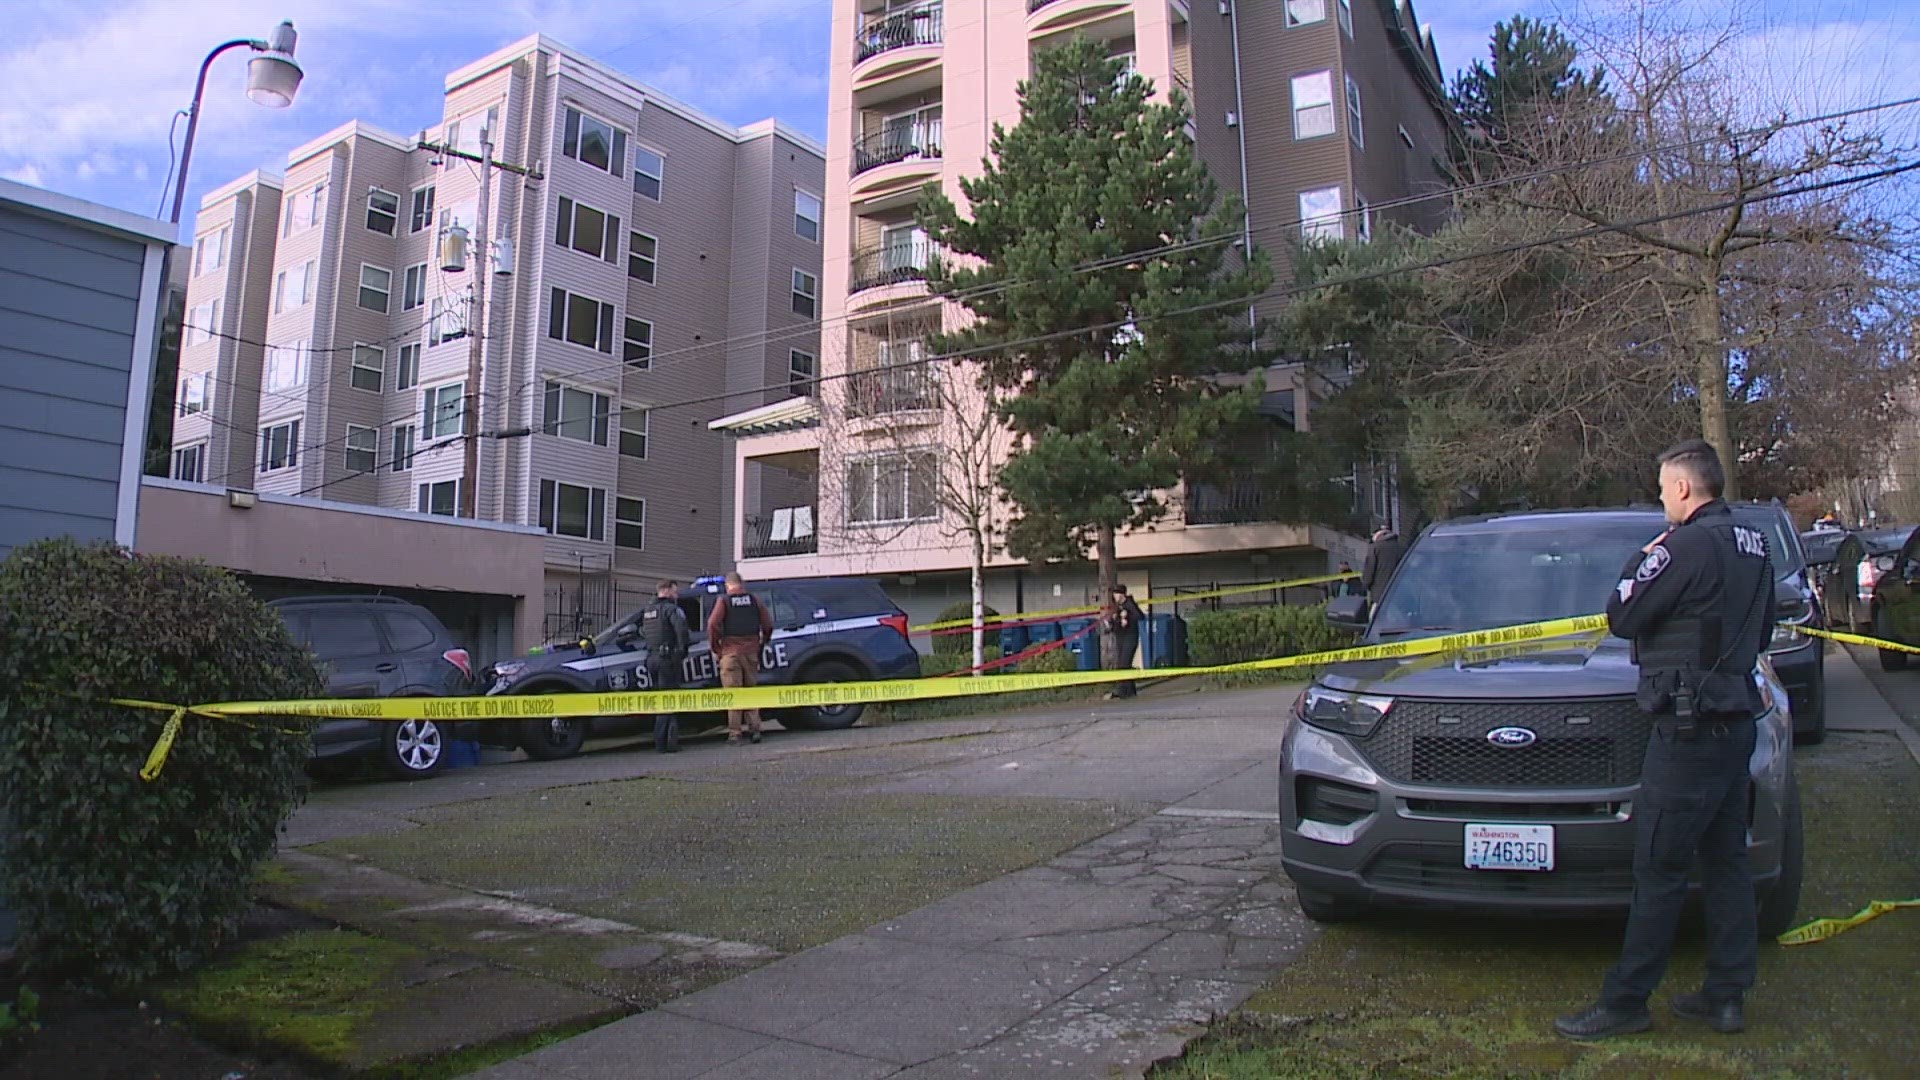 On Saturday, Seattle police said the man was found dead with obvious head trauma. Neighbors said he was killed in the spot he slept every night for years.